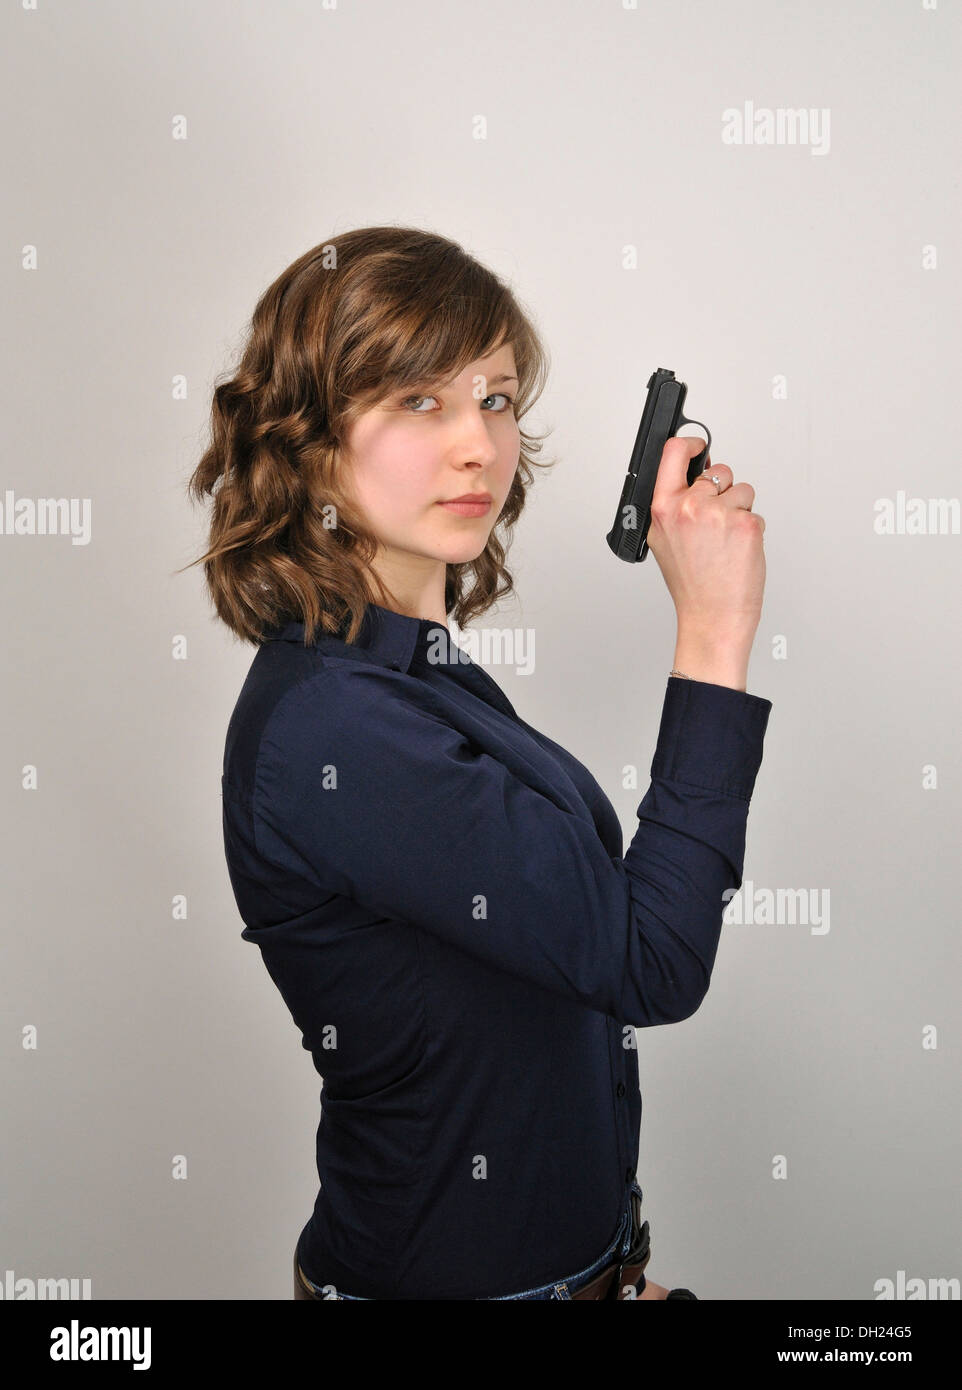 Young woman, 20, holding a pistol Stock Photo